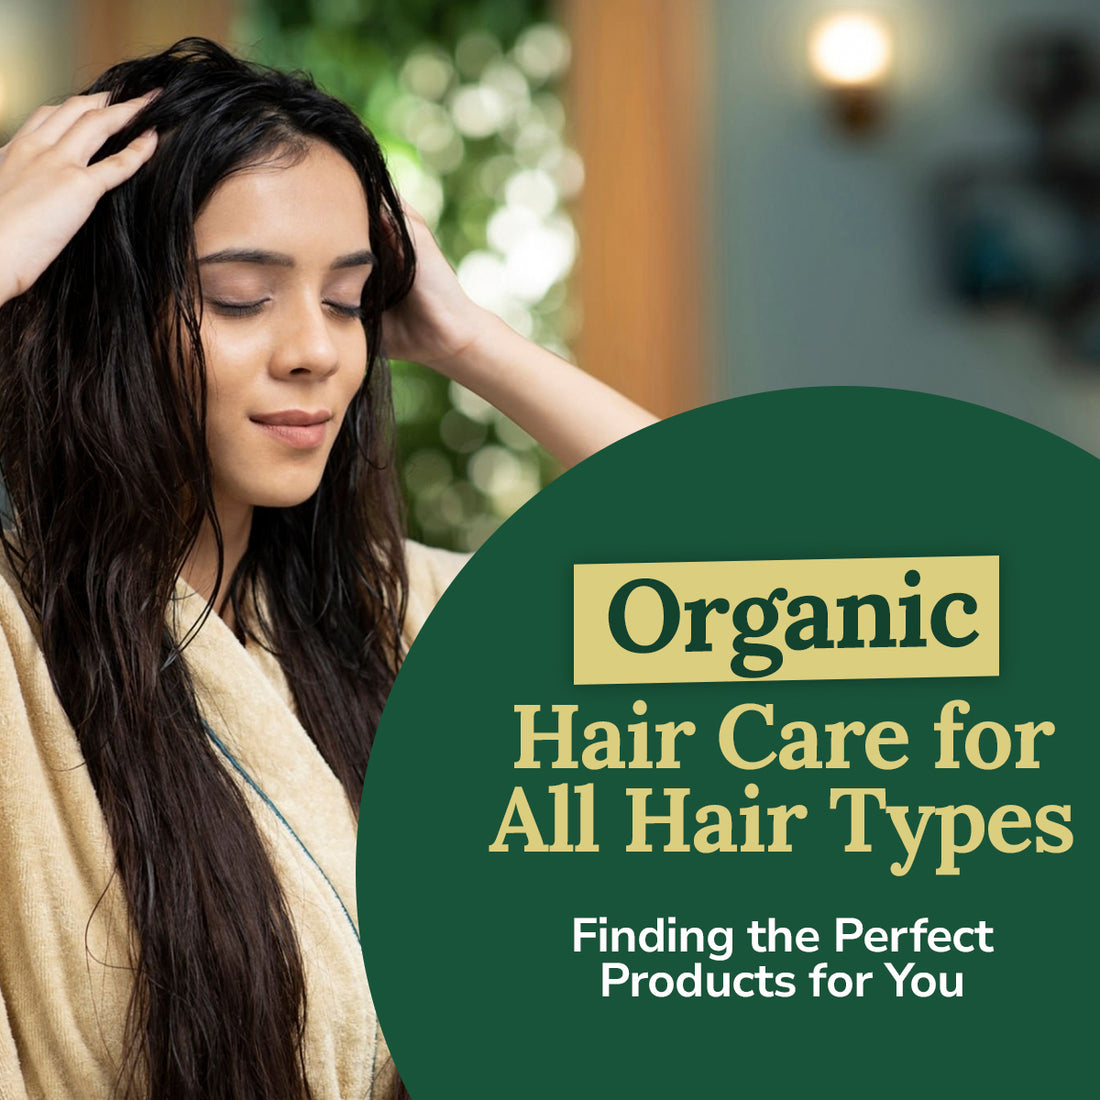 Organic Hair Care for All Hair Types: Finding the Perfect Products for You